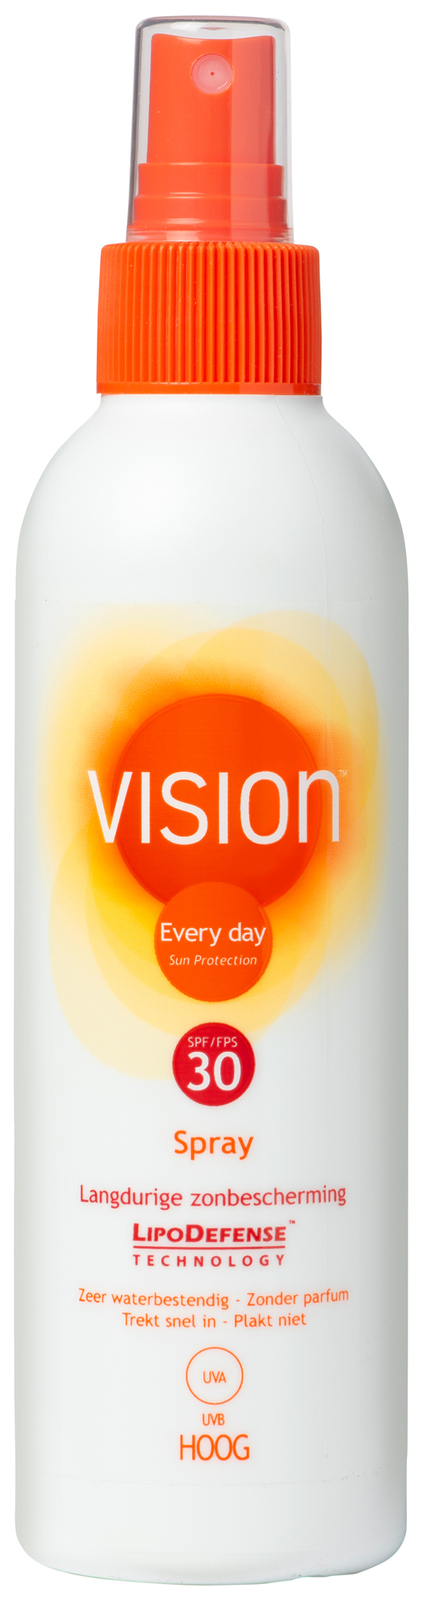 Image of Vision Every Day Sun Spray SPF30 